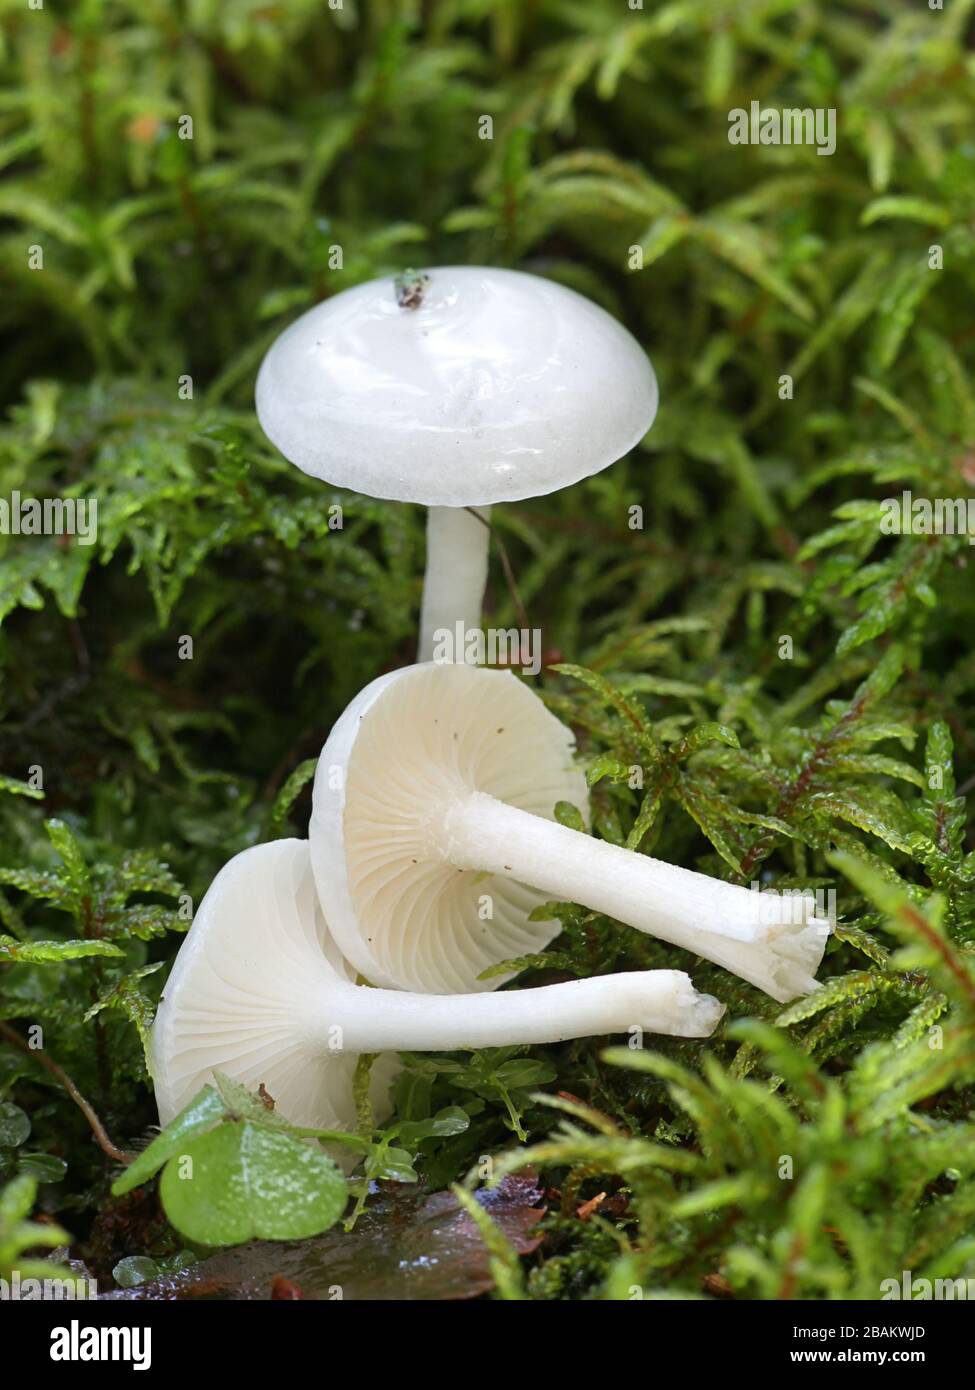 Hygrophorus piceae, white woodwax mushroom from Finland Stock Photo